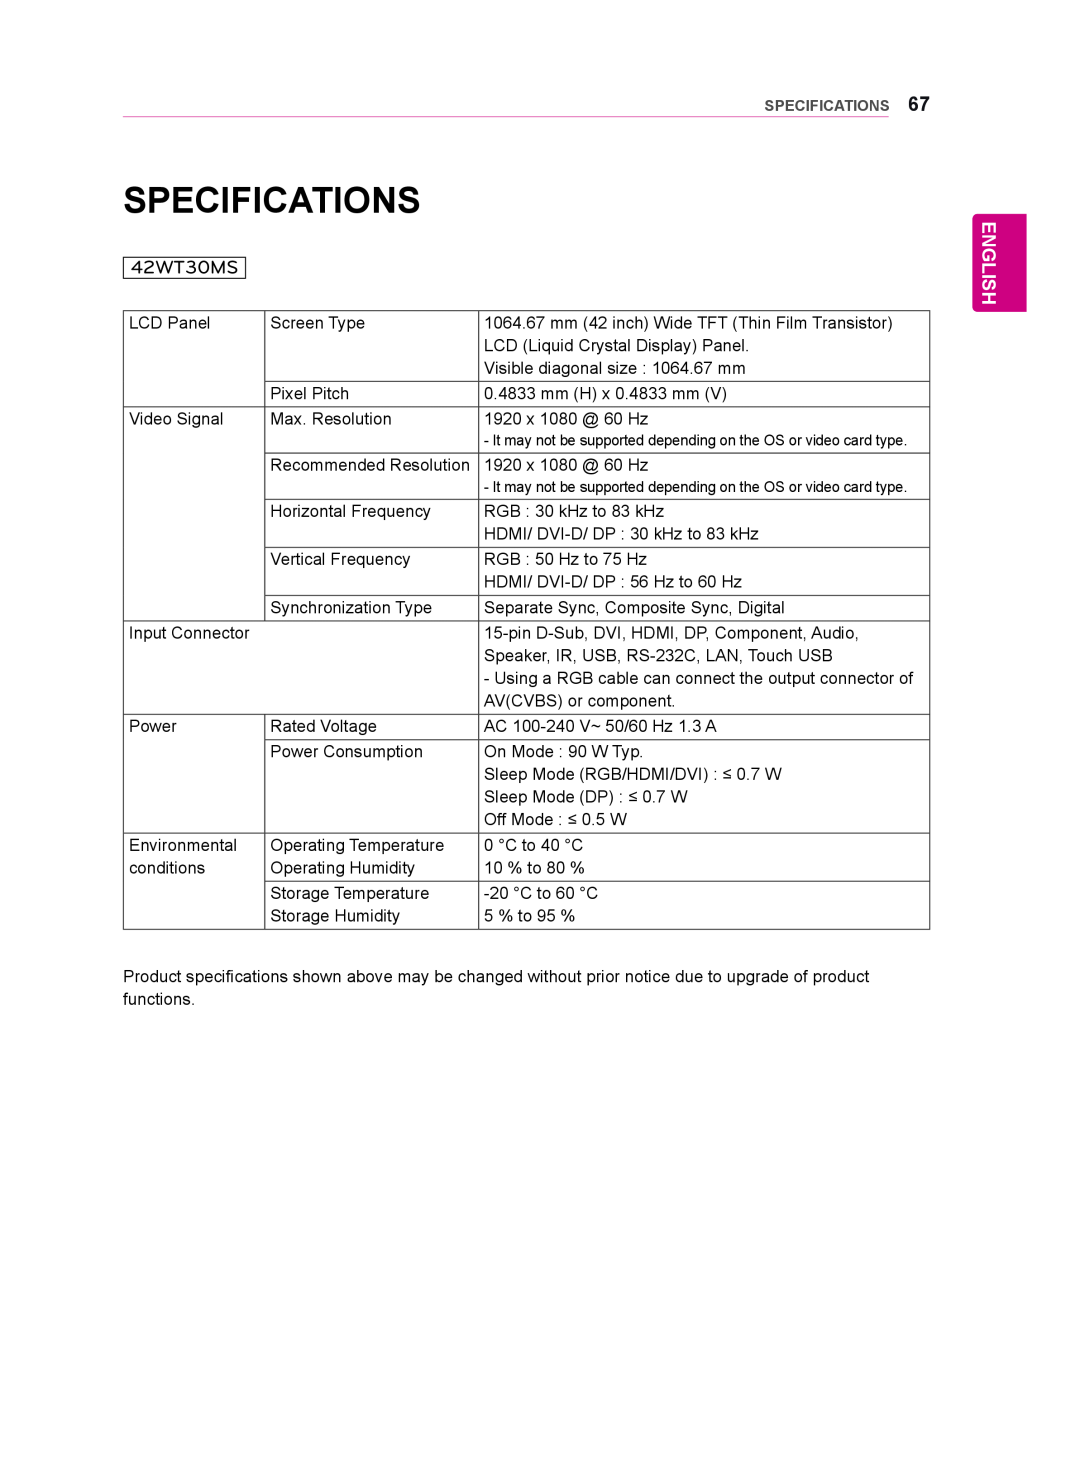 LG Electronics 42WT30MS, 55WT30MS, 47WT30MS owner manual Specifications, English 